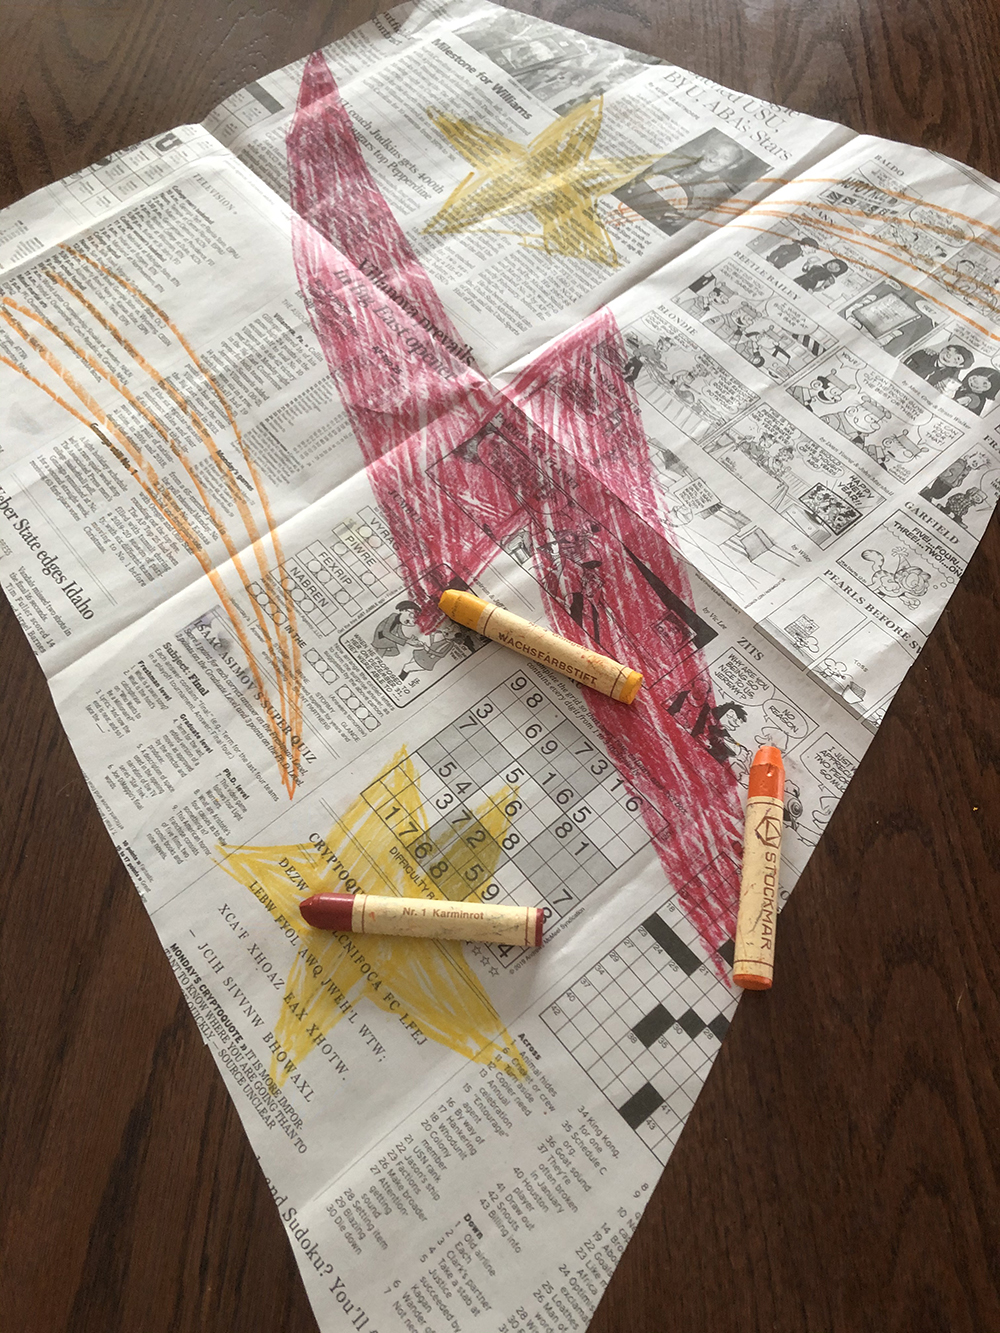 Newspaper kite with an orange lighting bolt colored on it in crayon